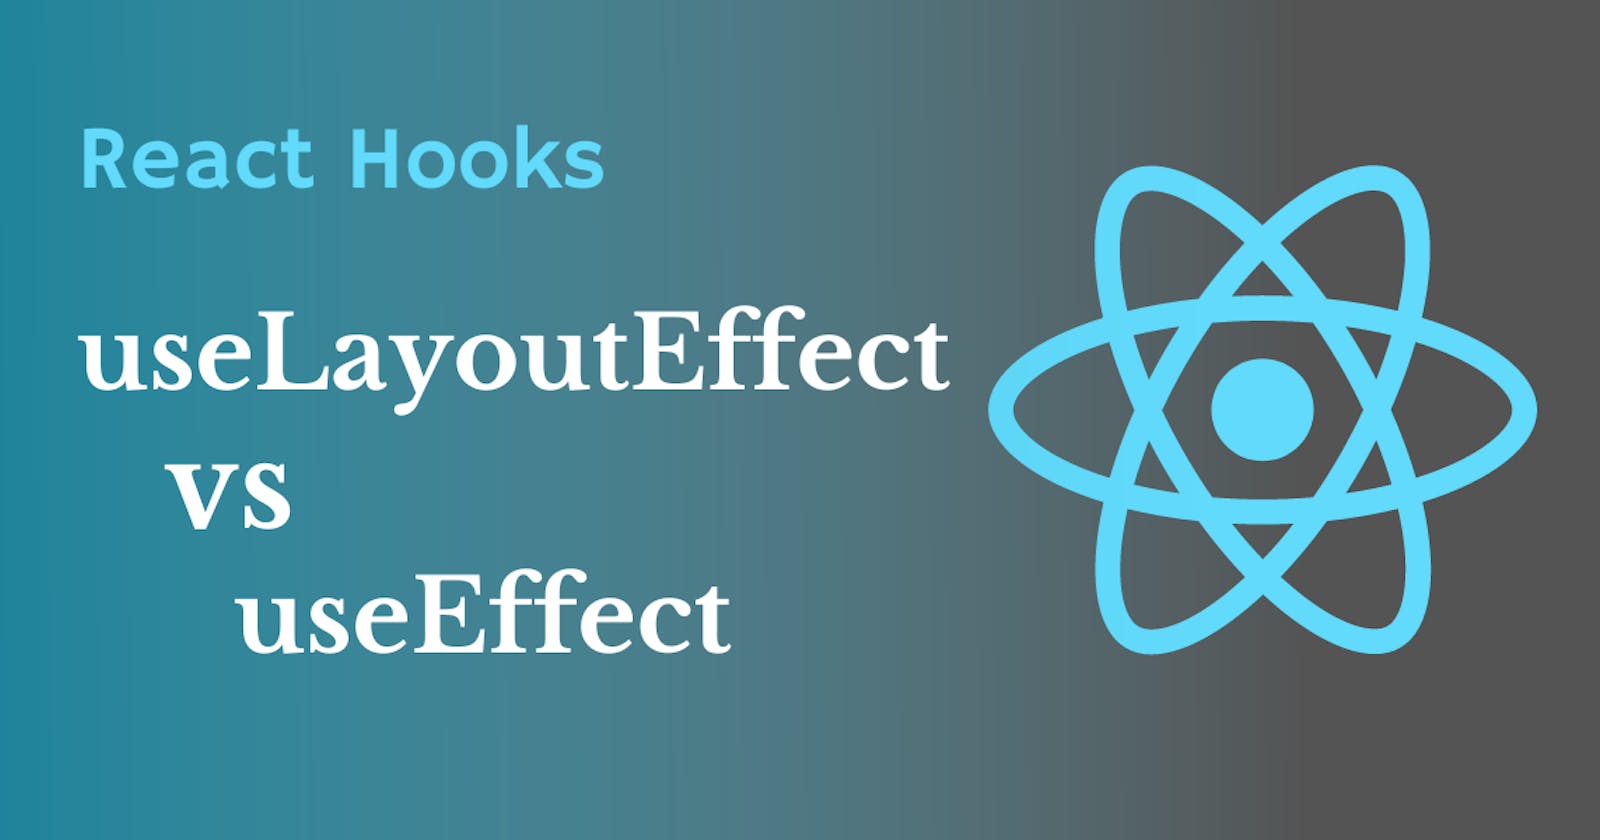 useEffect and useLayoutEffect: The Differences and Use Cases